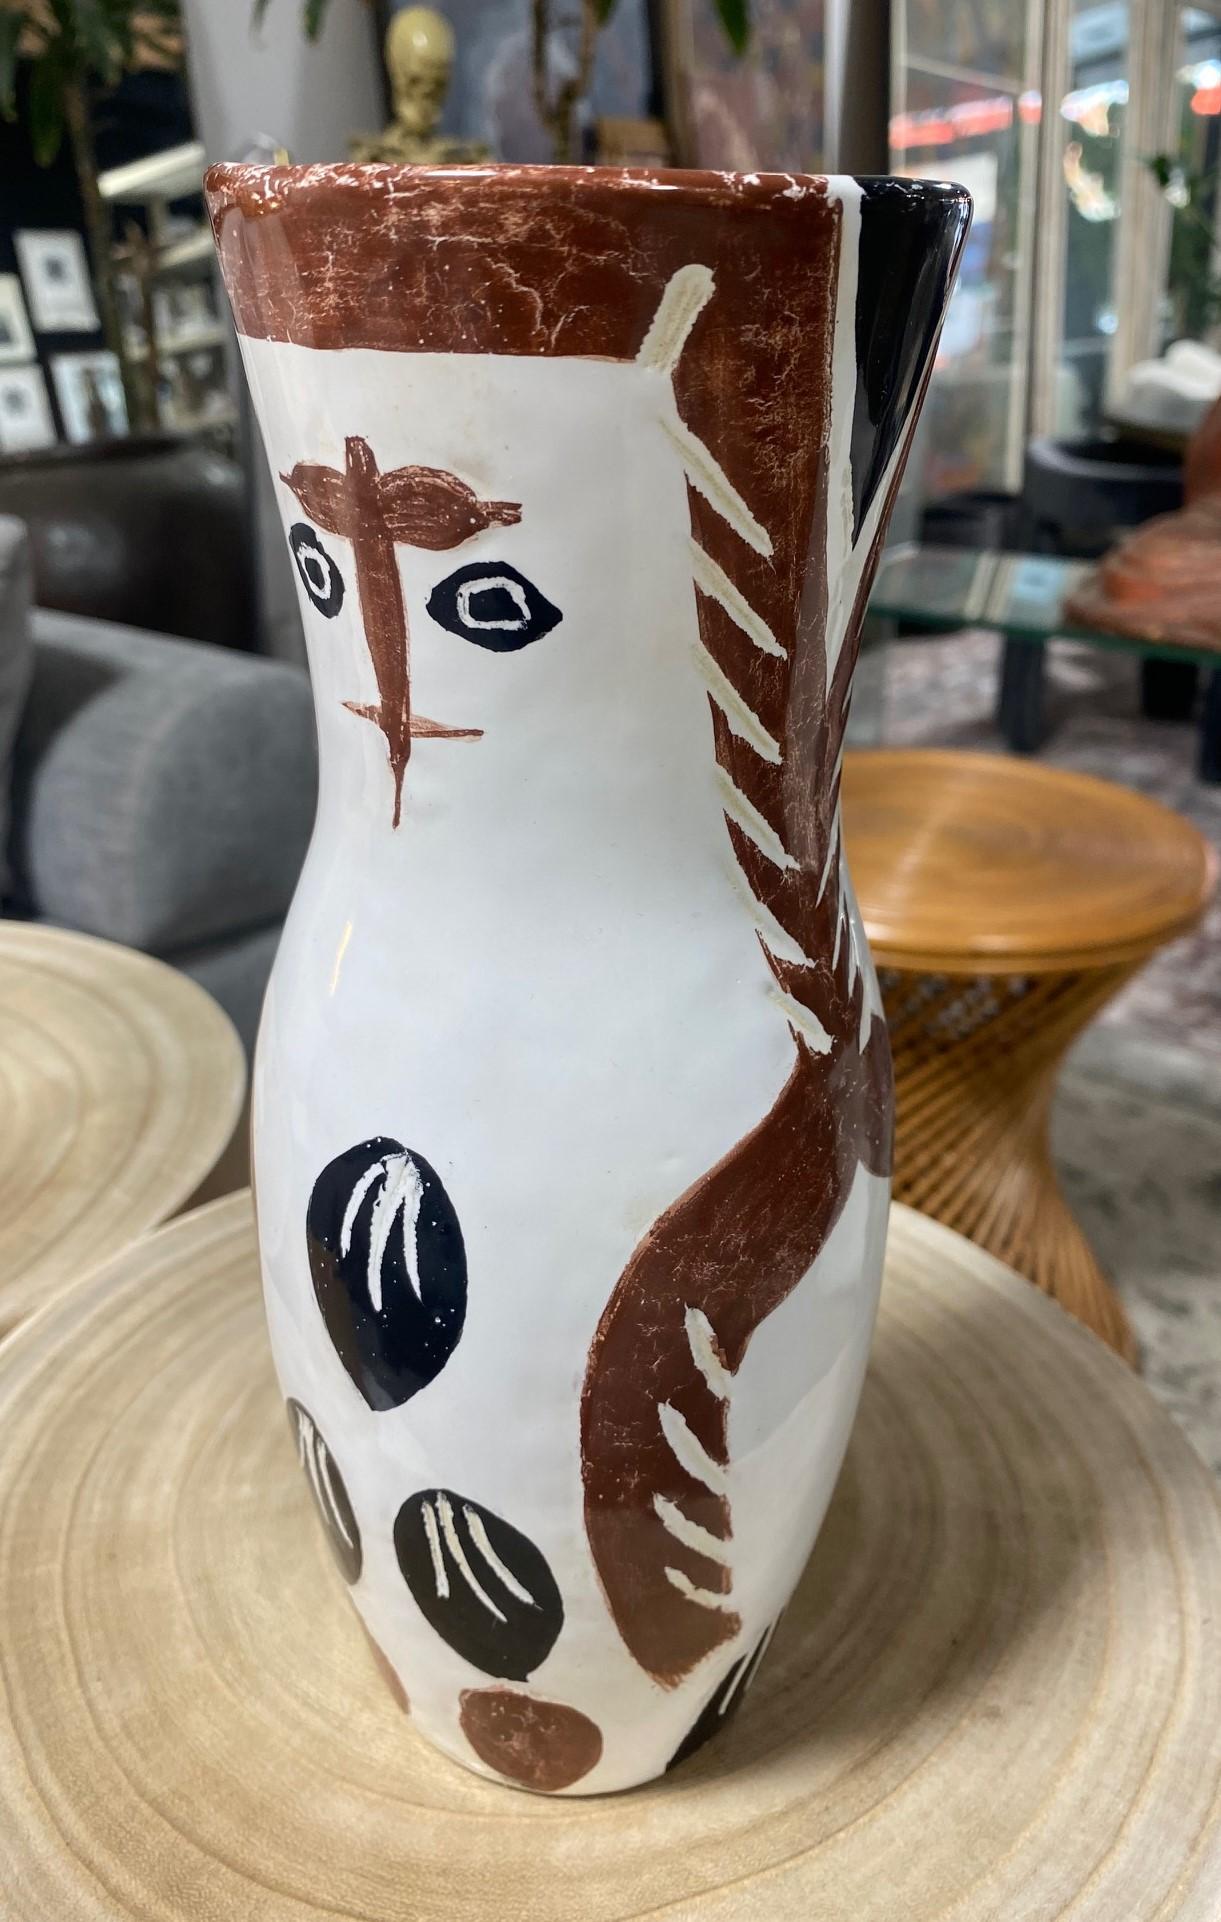 Pablo Picasso Signed Limited Madoura Pottery Chouetton Owl Vase A.R. 135, 1952 For Sale 1